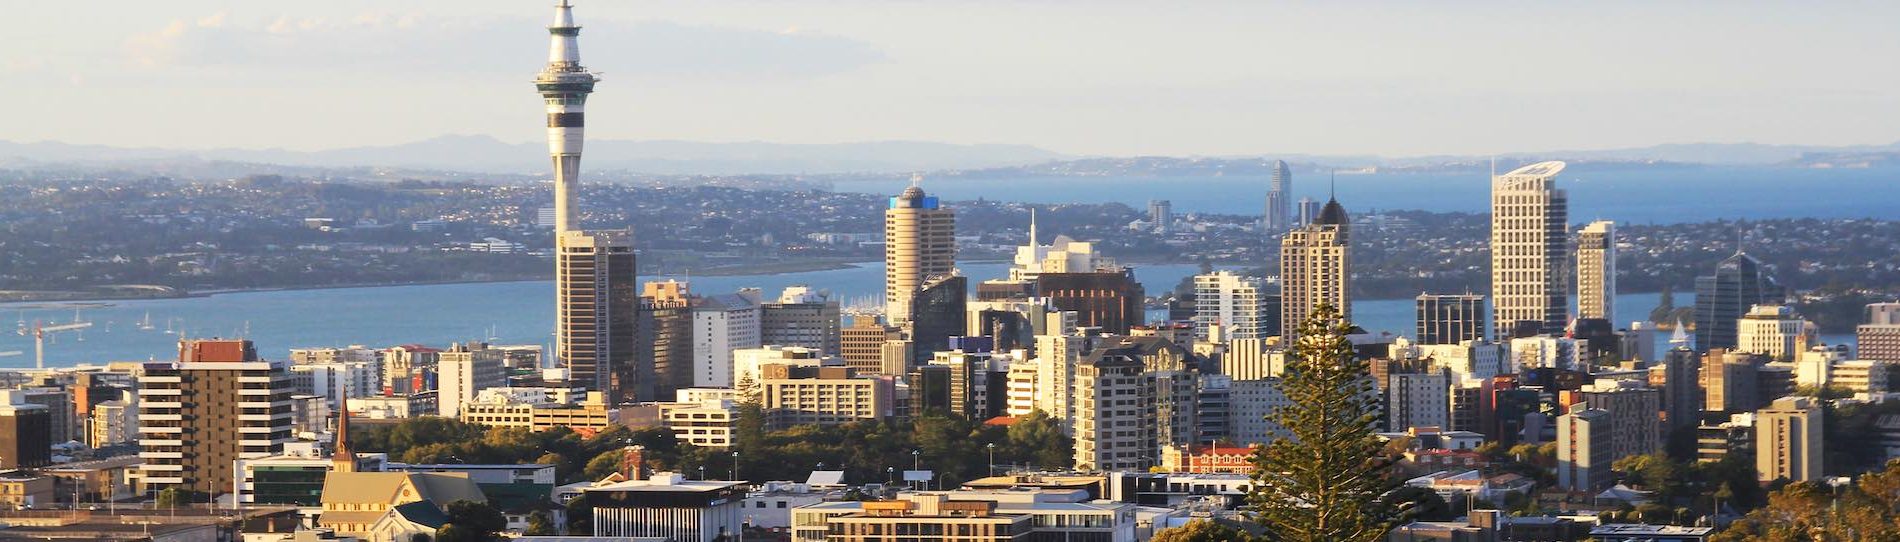 aerial view of auckland highrises